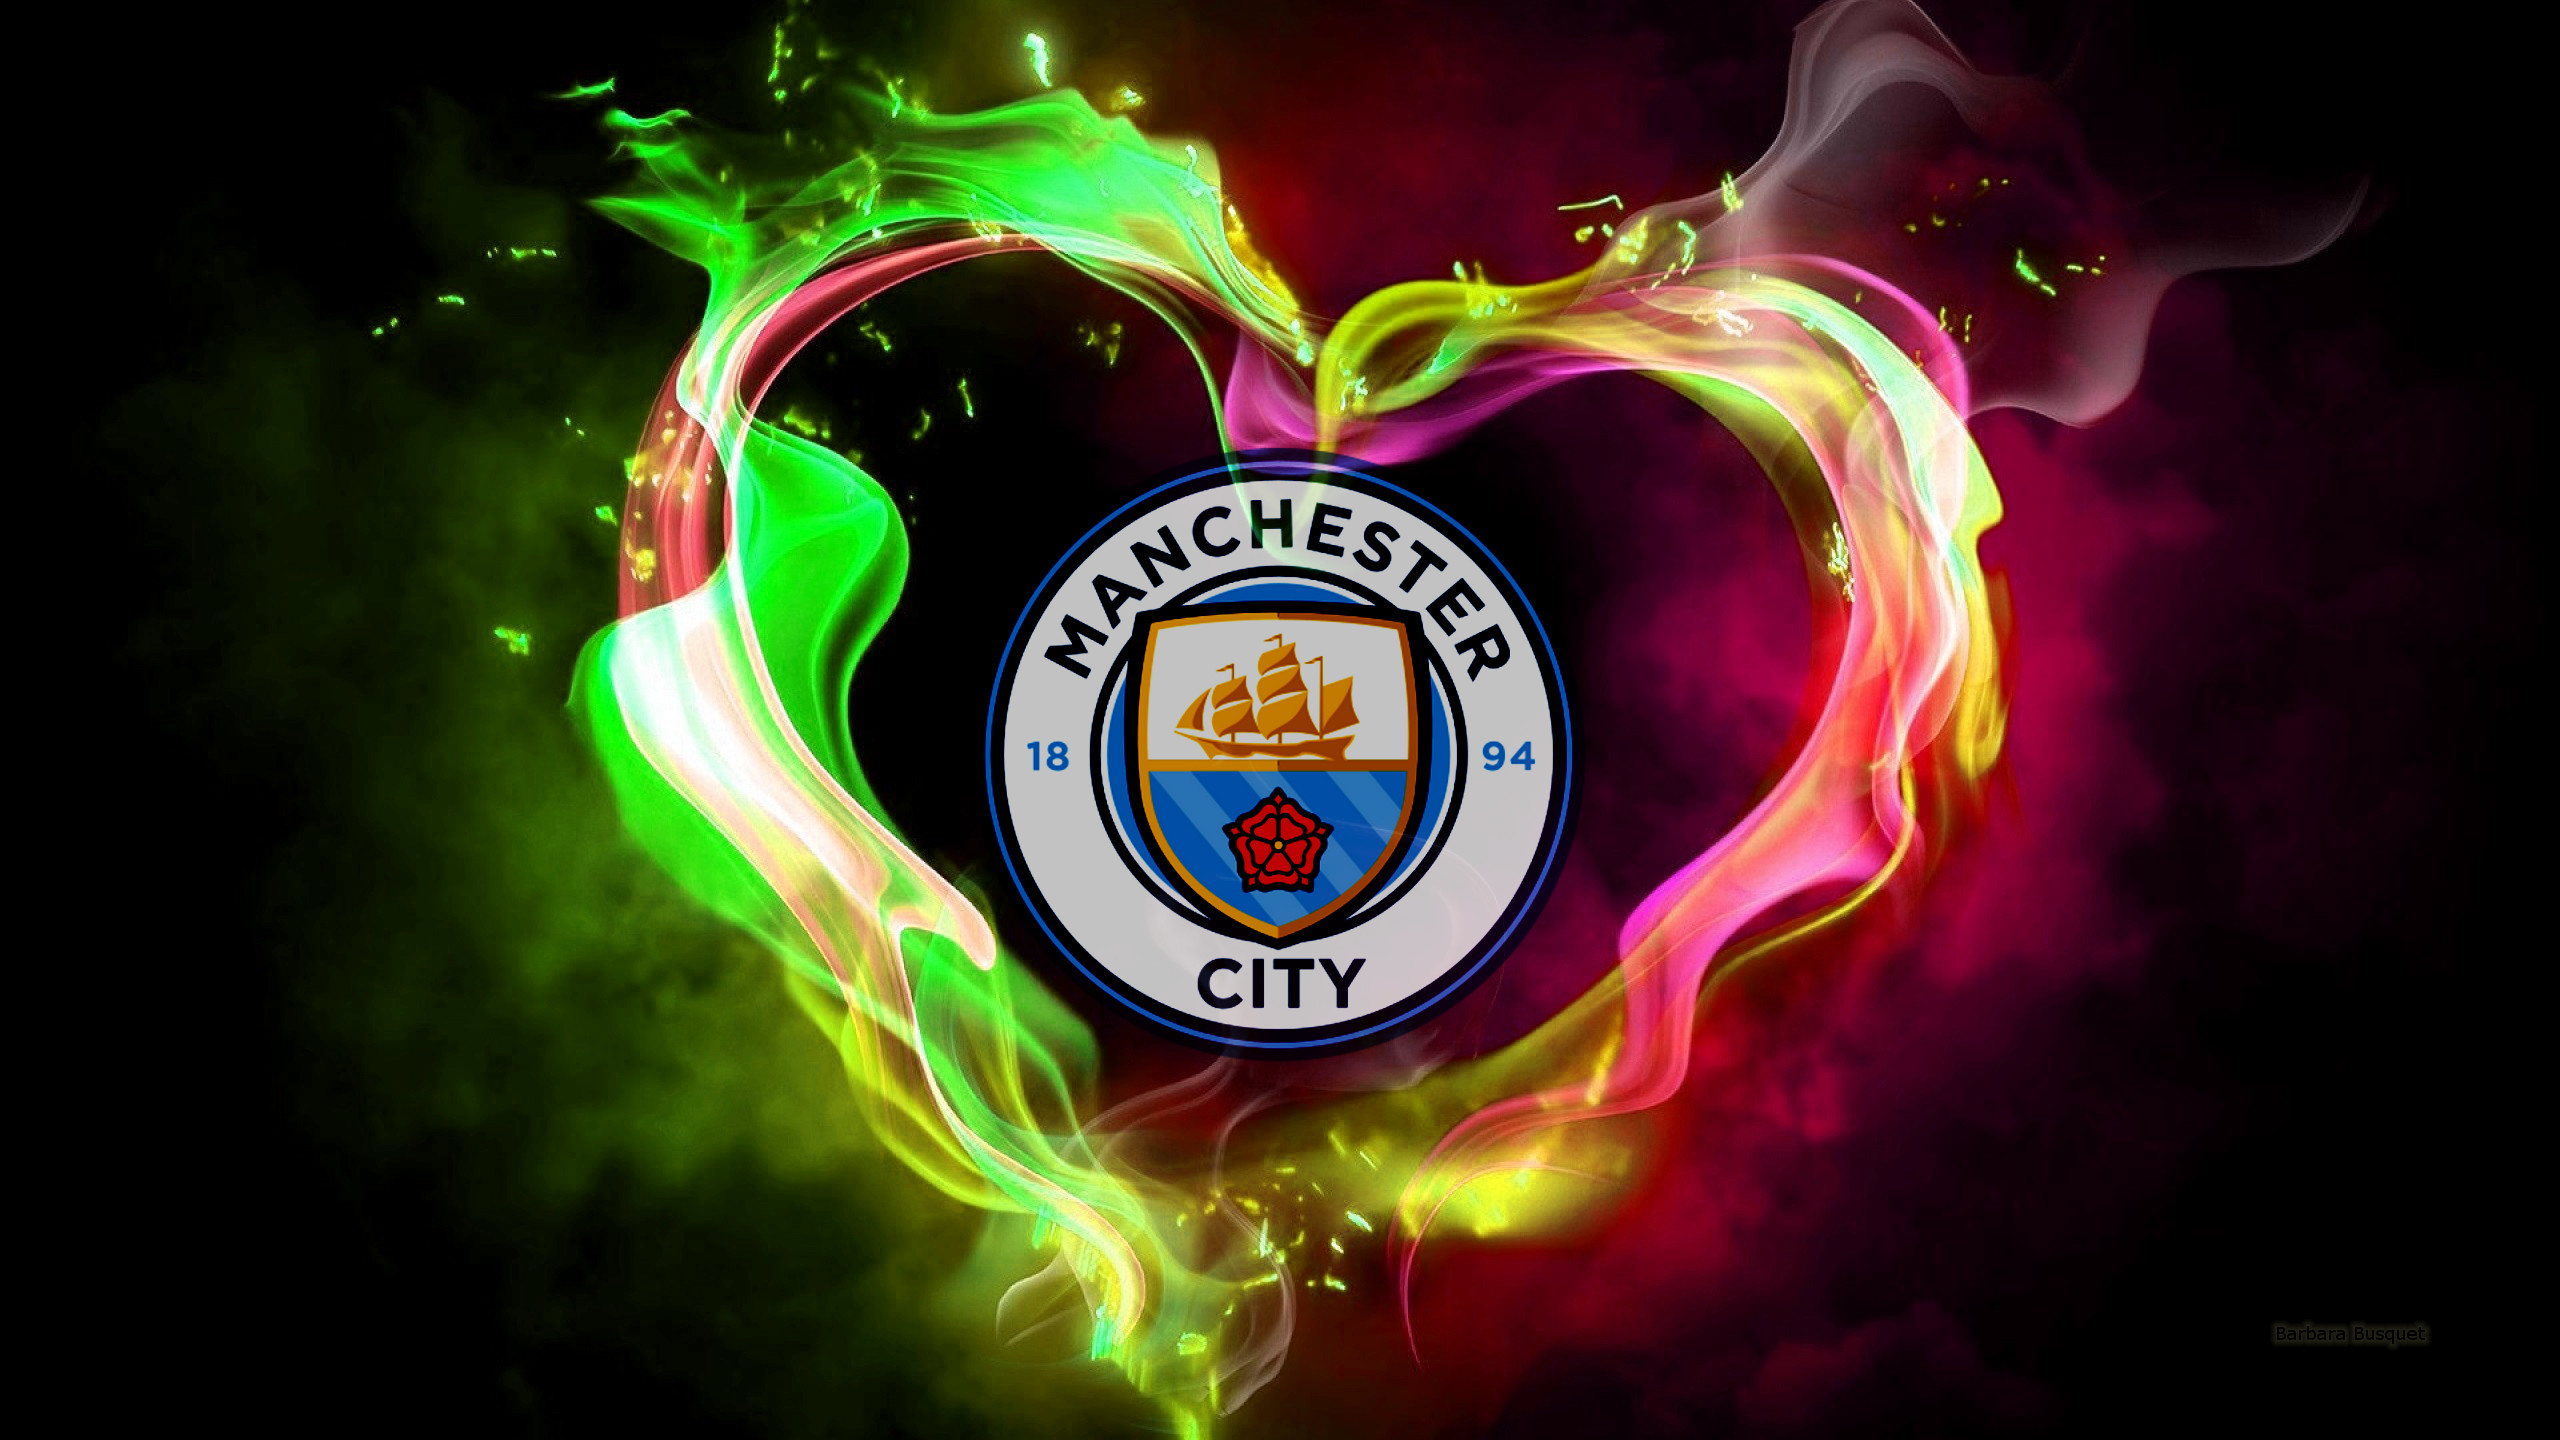 Free download Manchester City FC HD Wallpaper Background Image 2560x1440 [2560x1440] for your Desktop, Mobile & Tablet. Explore Manchester City Logos Wallpaper. Manchester City Logos Wallpaper, Manchester City Wallpaper